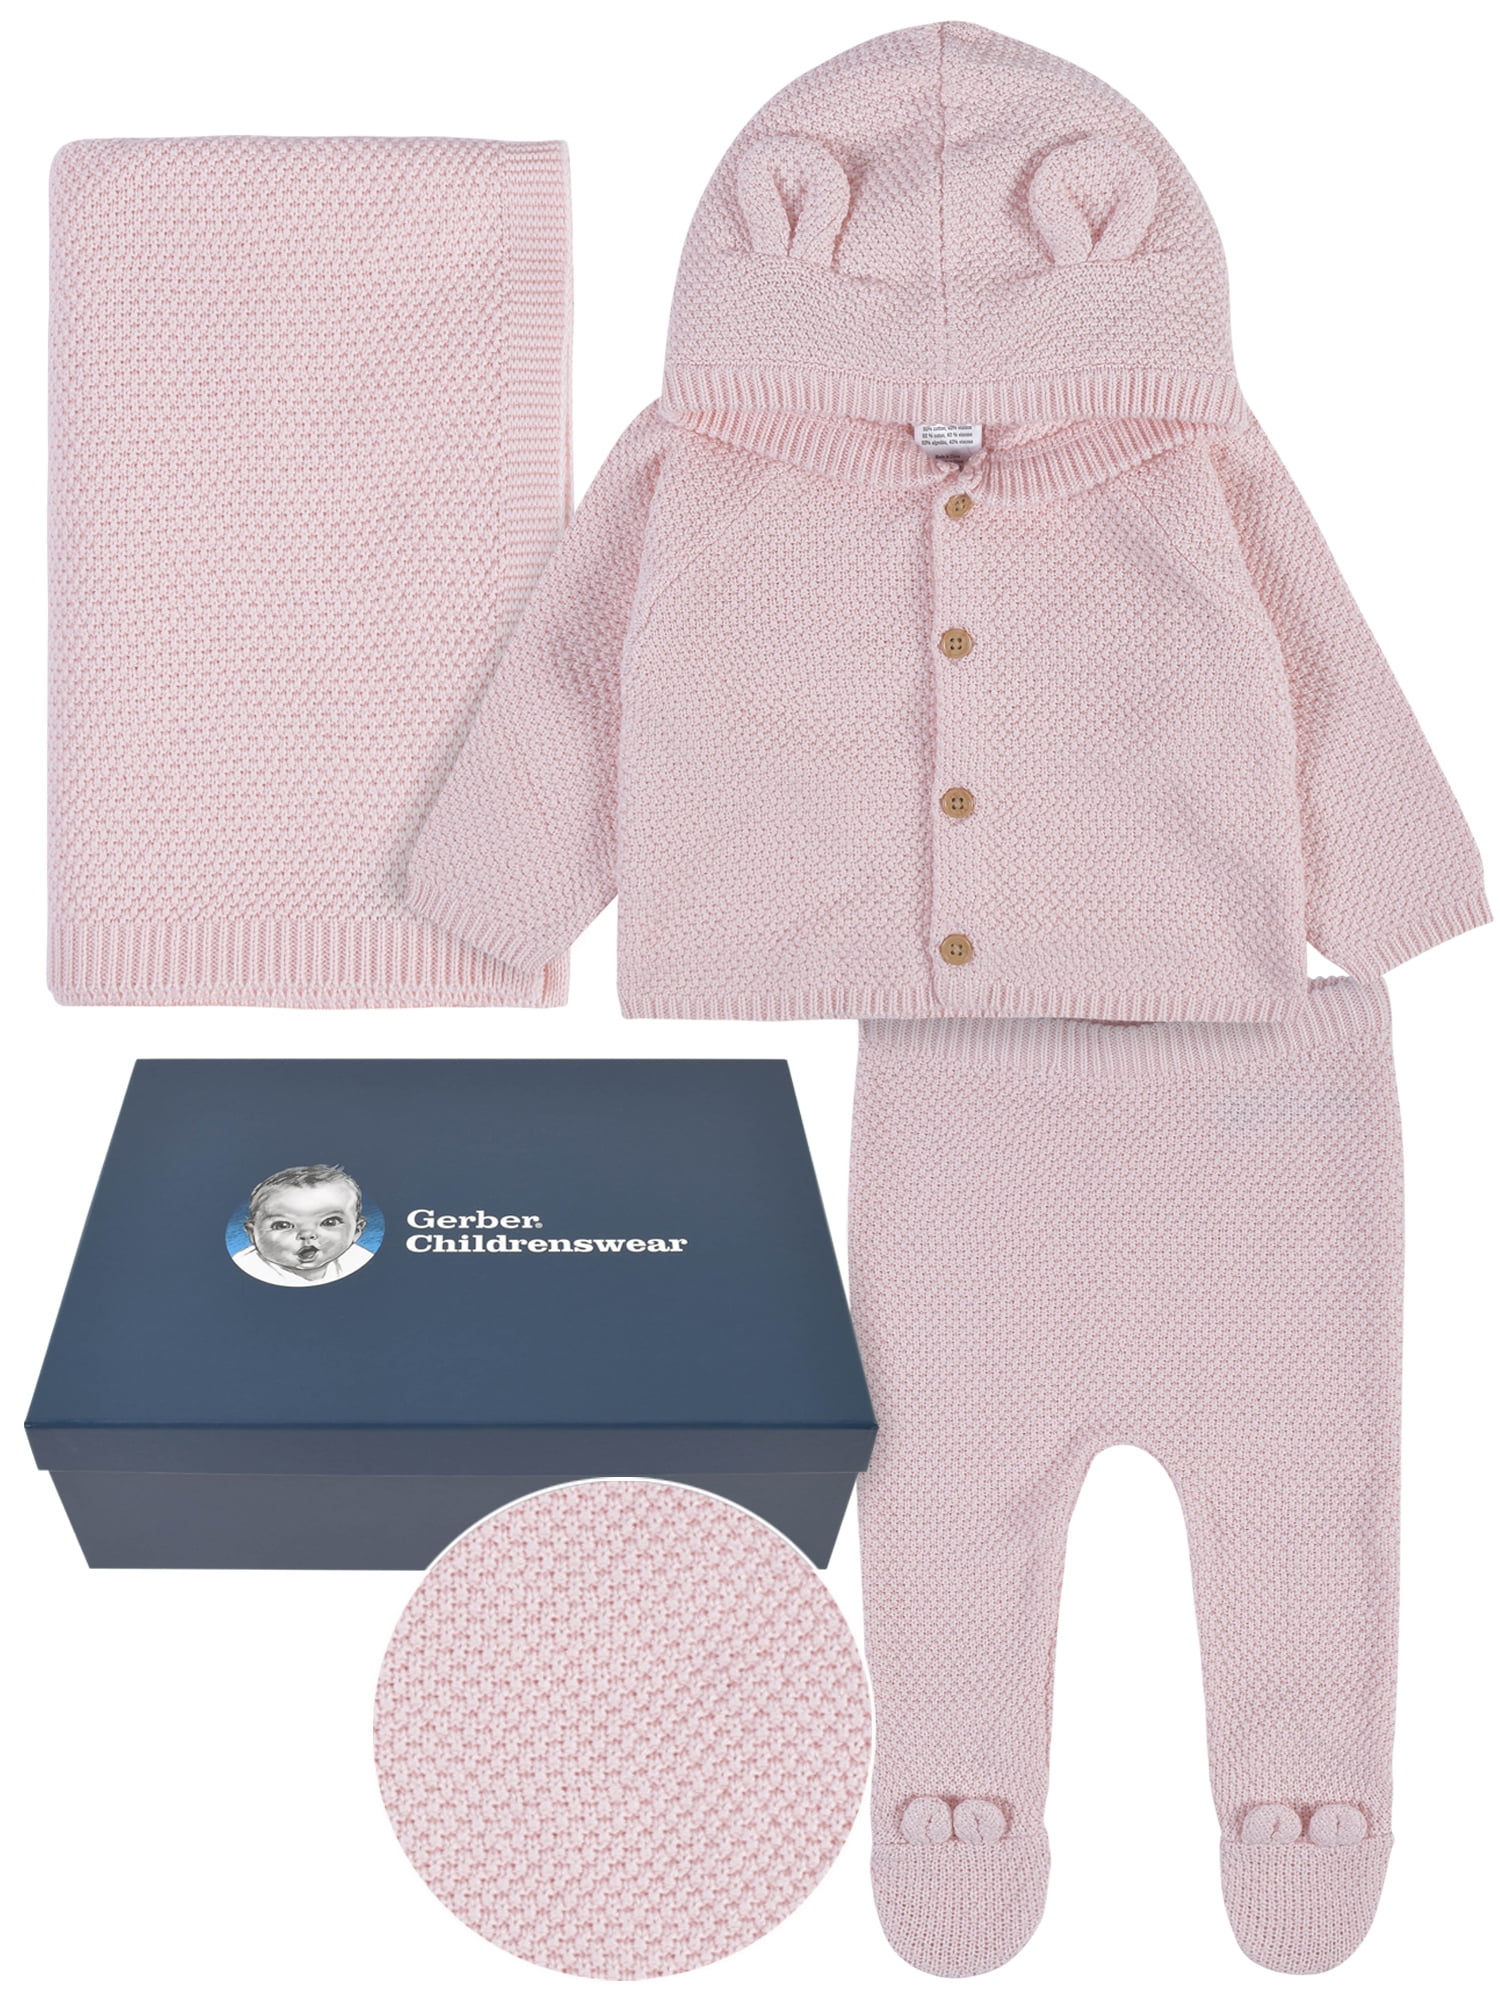 NEW HOODED CARDIGAN with BONNET 3 Months Girls MULTI-COLOURED FREE DELIVERY 